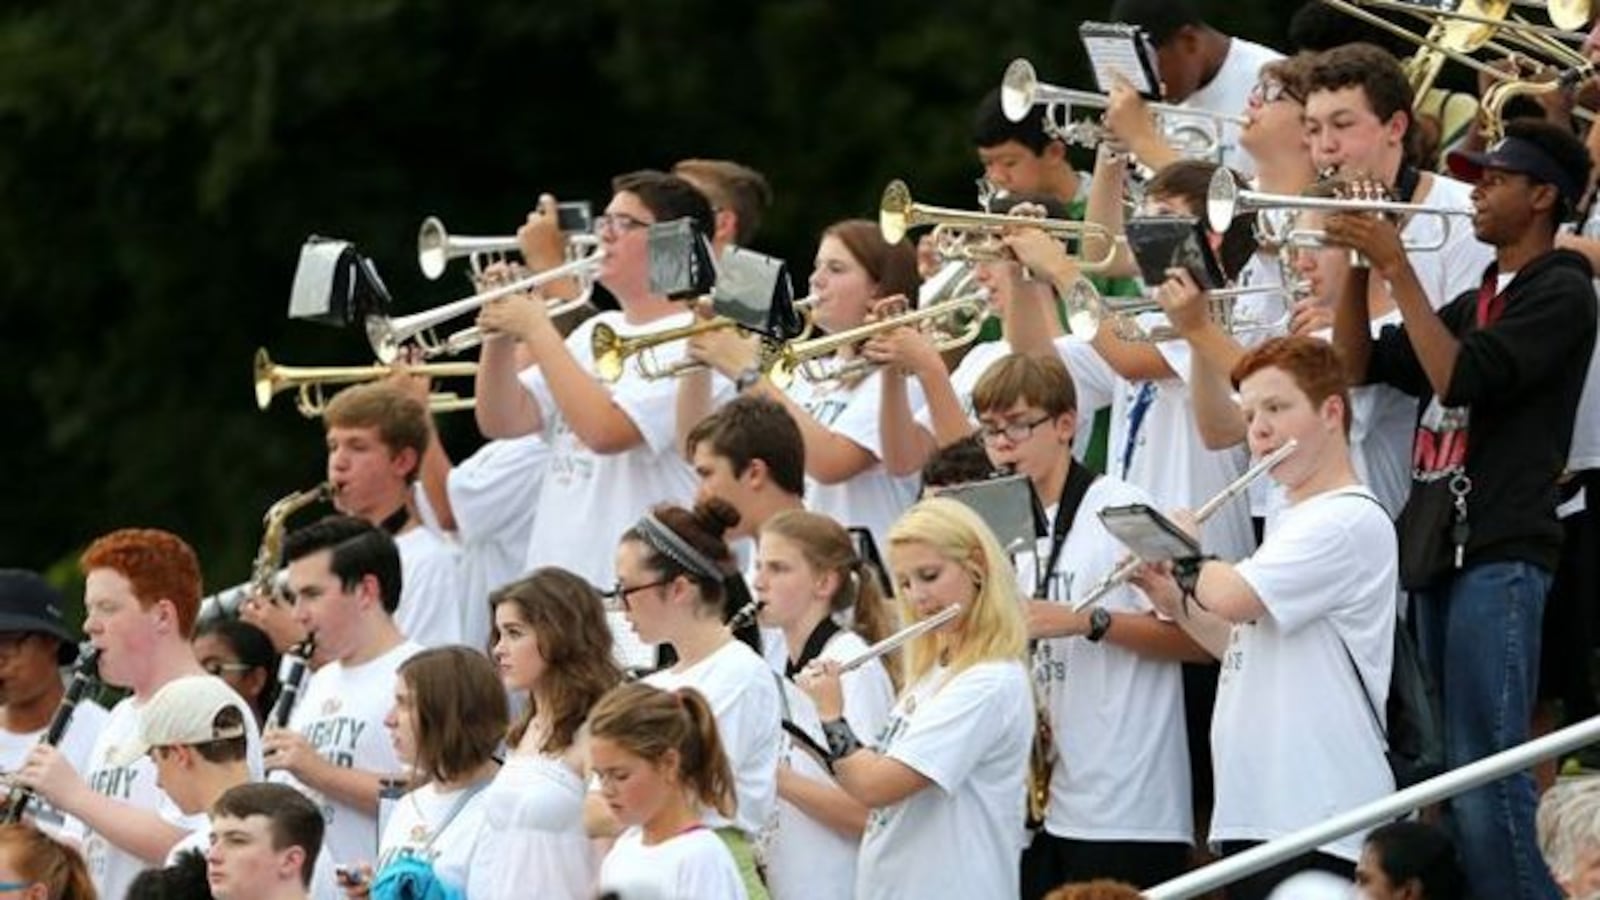 The Briarcrest High School band at a 2016 football game against St. George's.